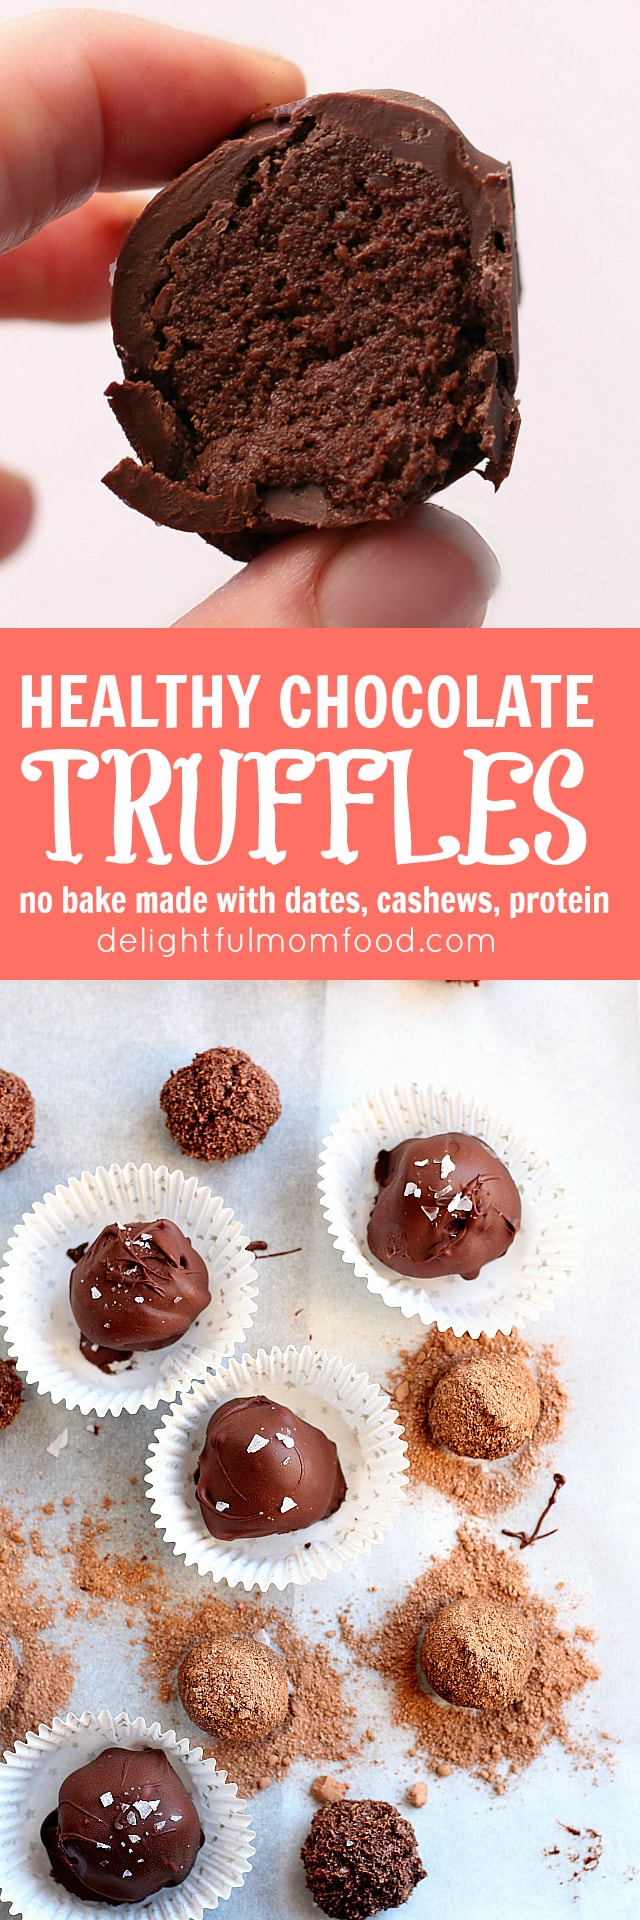 Guilt free Chocolate truffles made with dates, cashews, protein powder and coconut flour